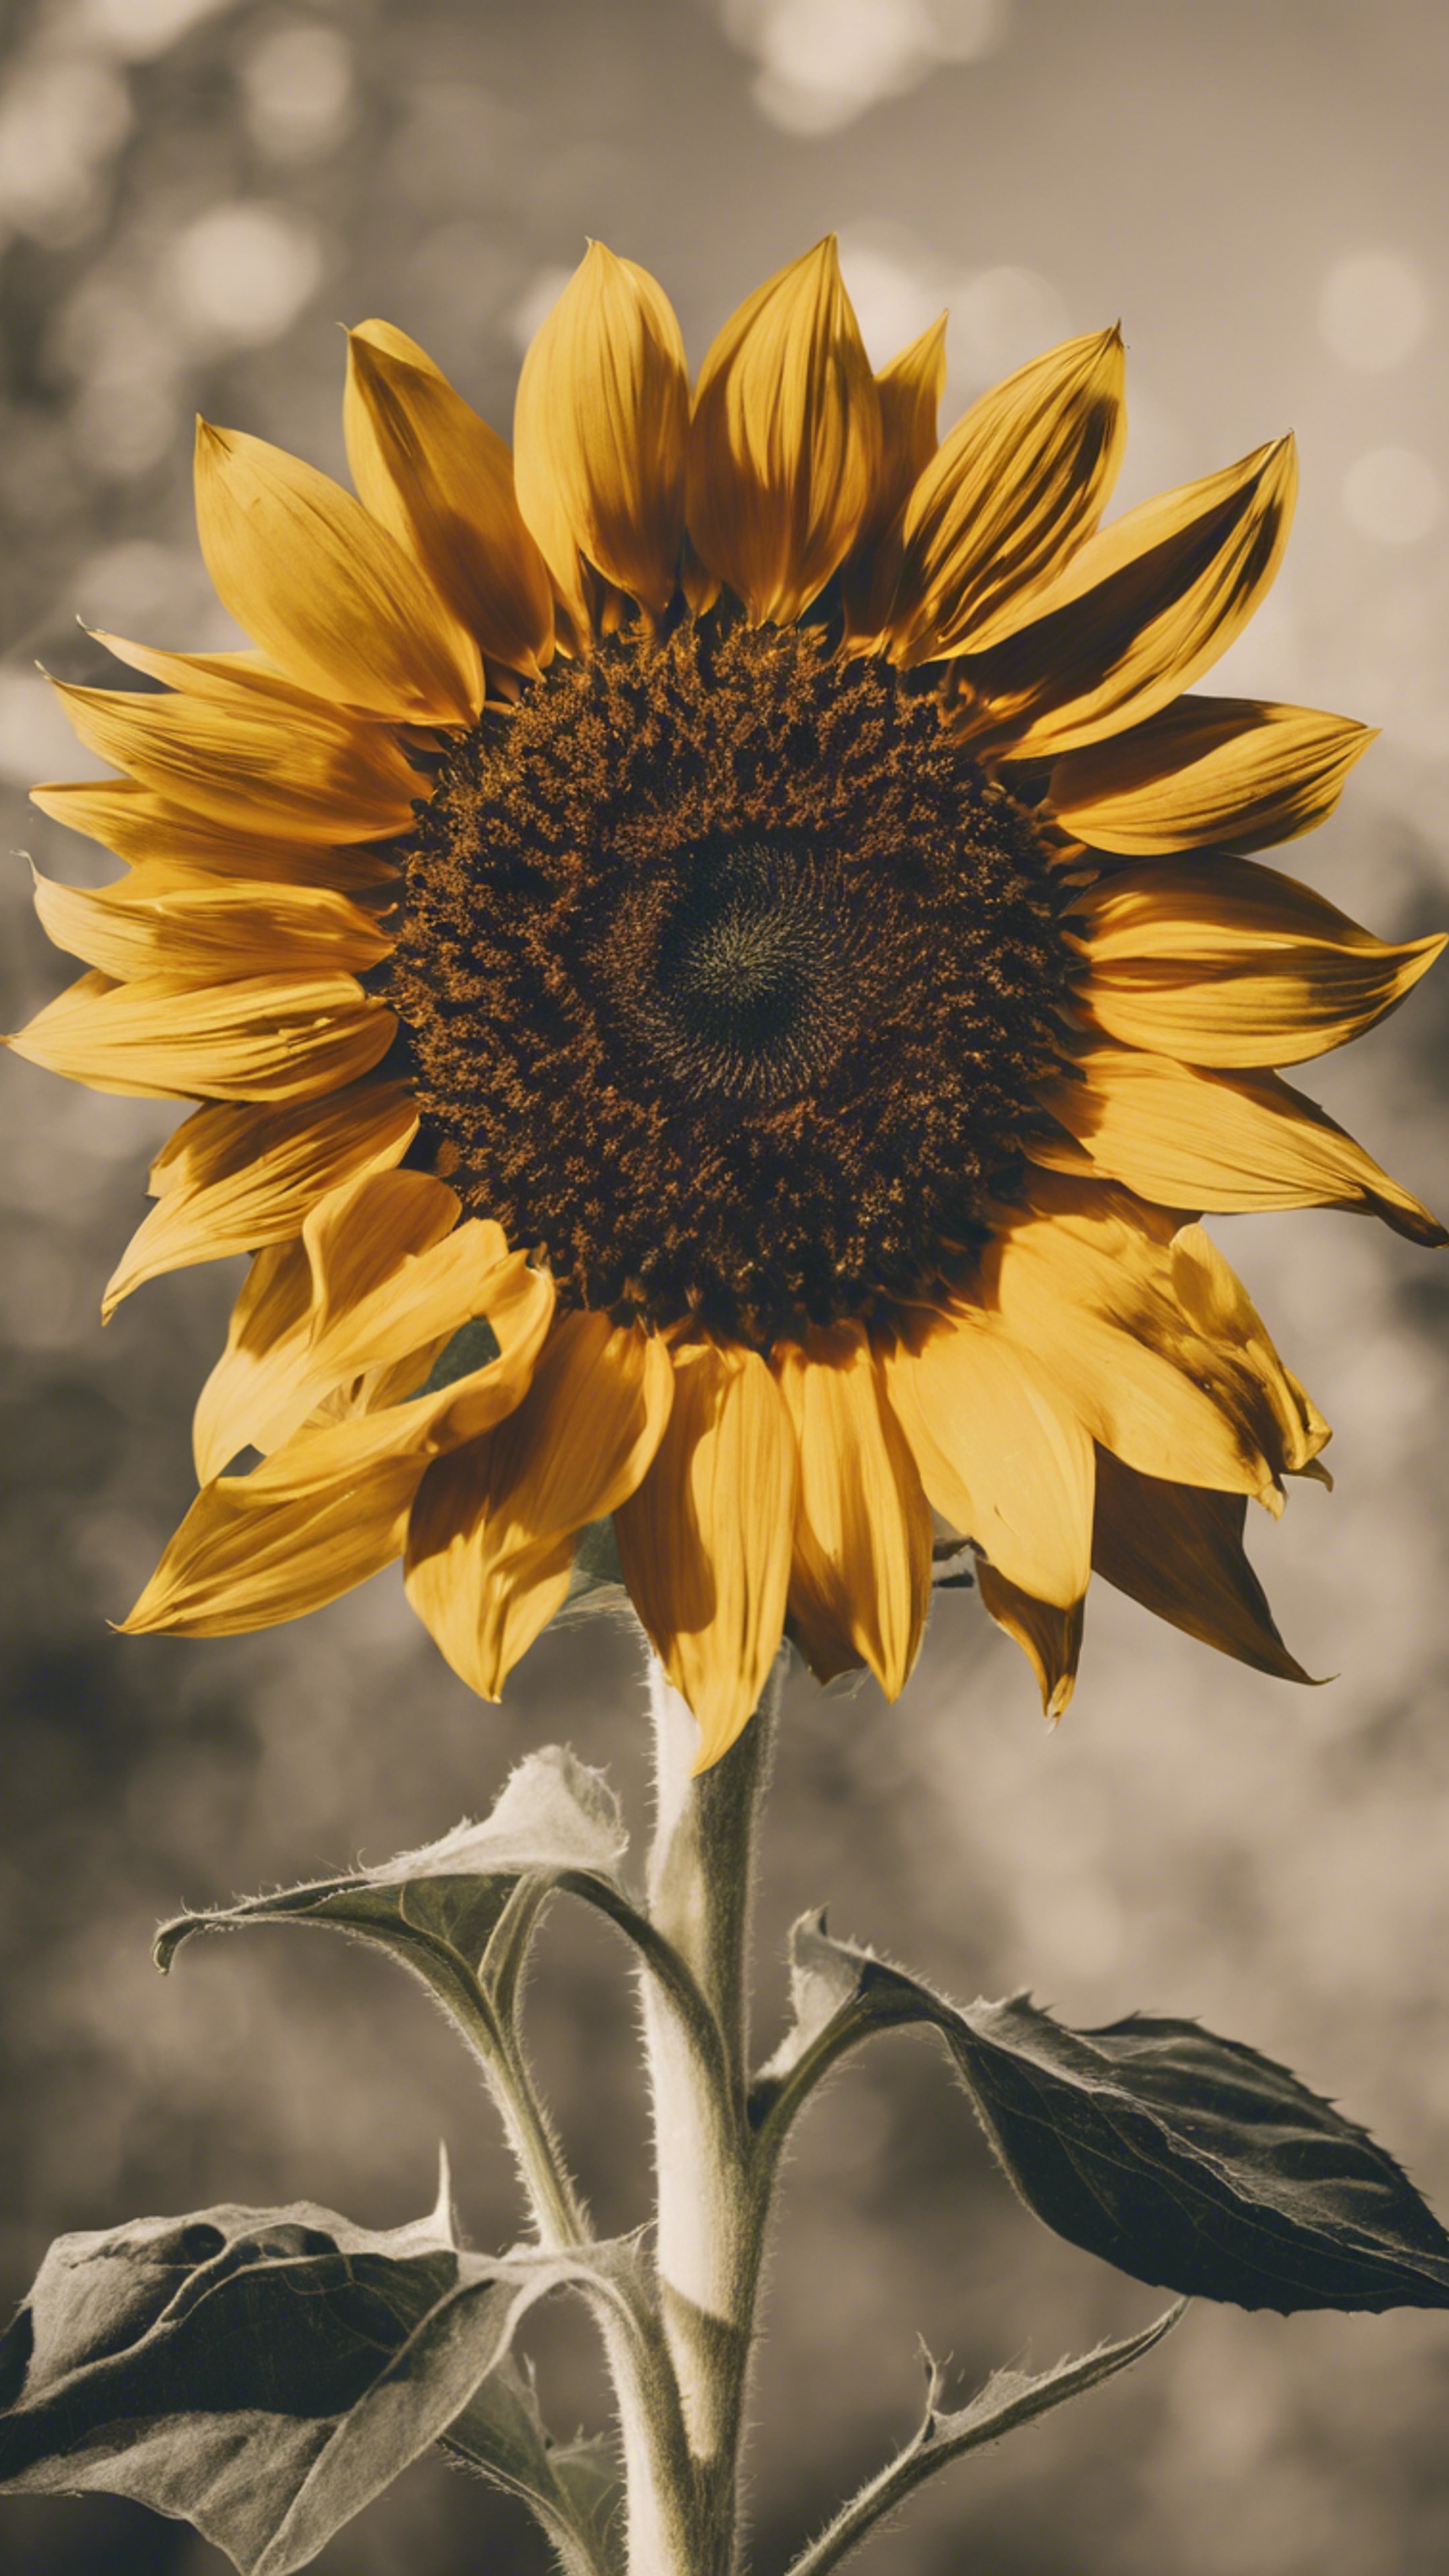 A stylized retro sunflower with bold yellow petals and a dark brown center. Ταπετσαρία[13785a0774844f708a81]